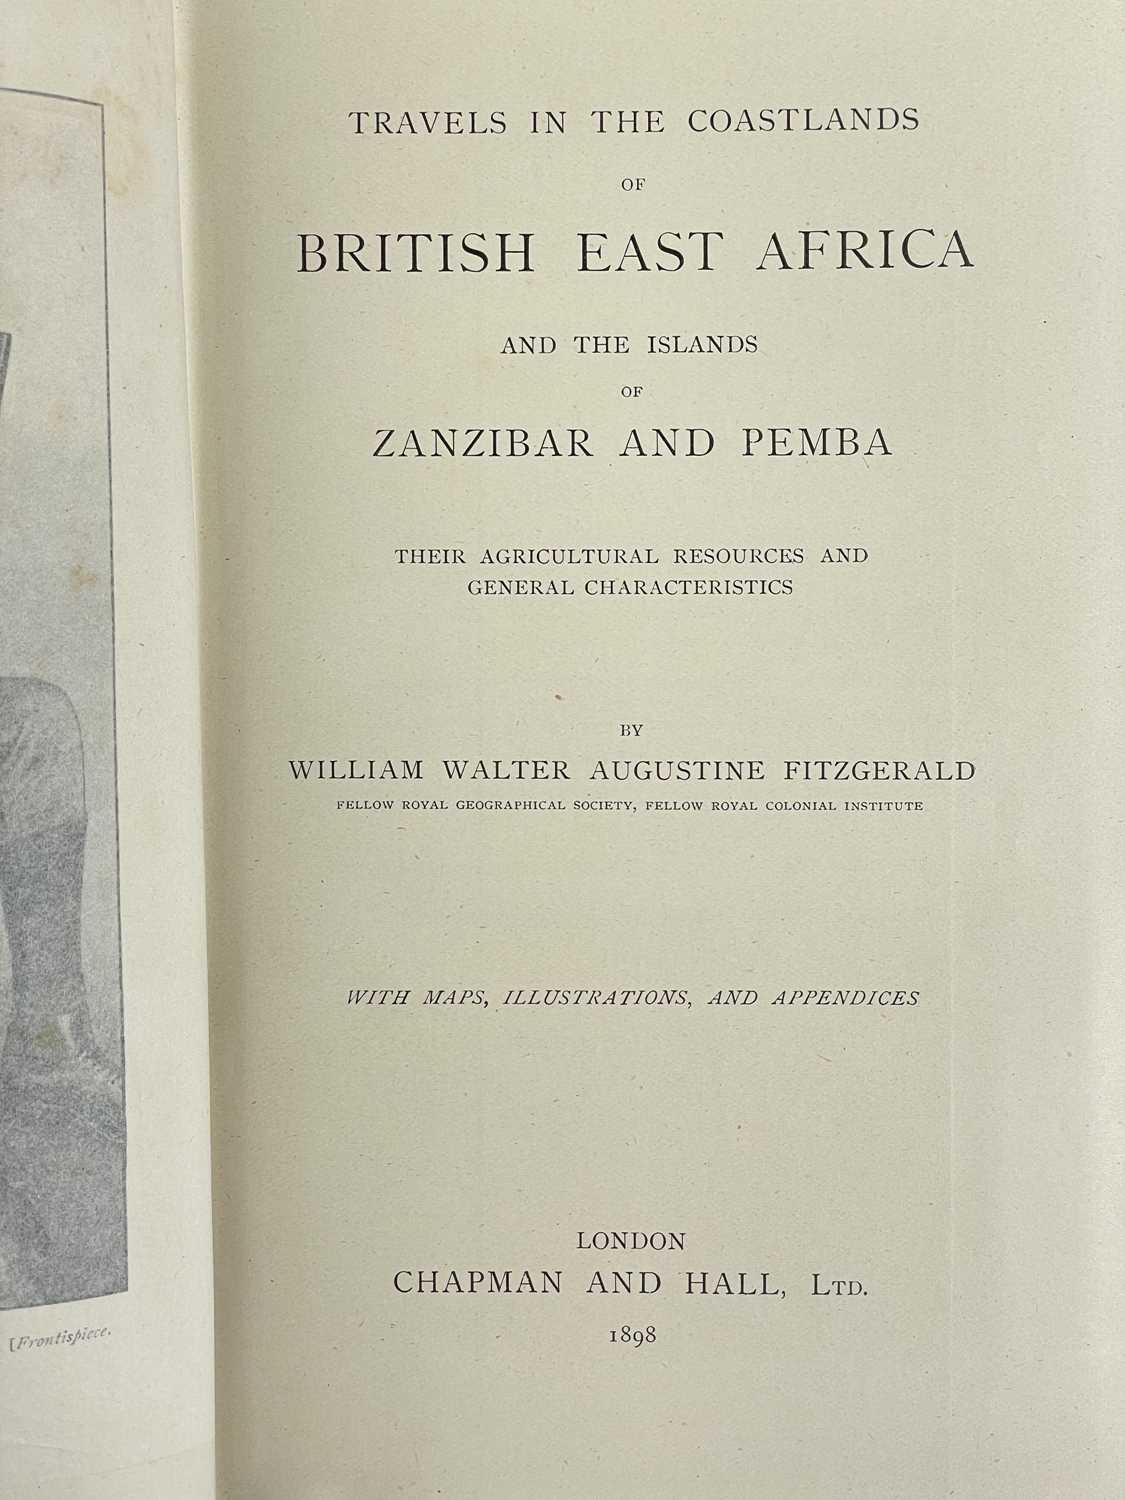 FTZGERALD, William Walter Augustine. 'Travels in the Coastlands of British East Africa and The Islan - Image 3 of 8